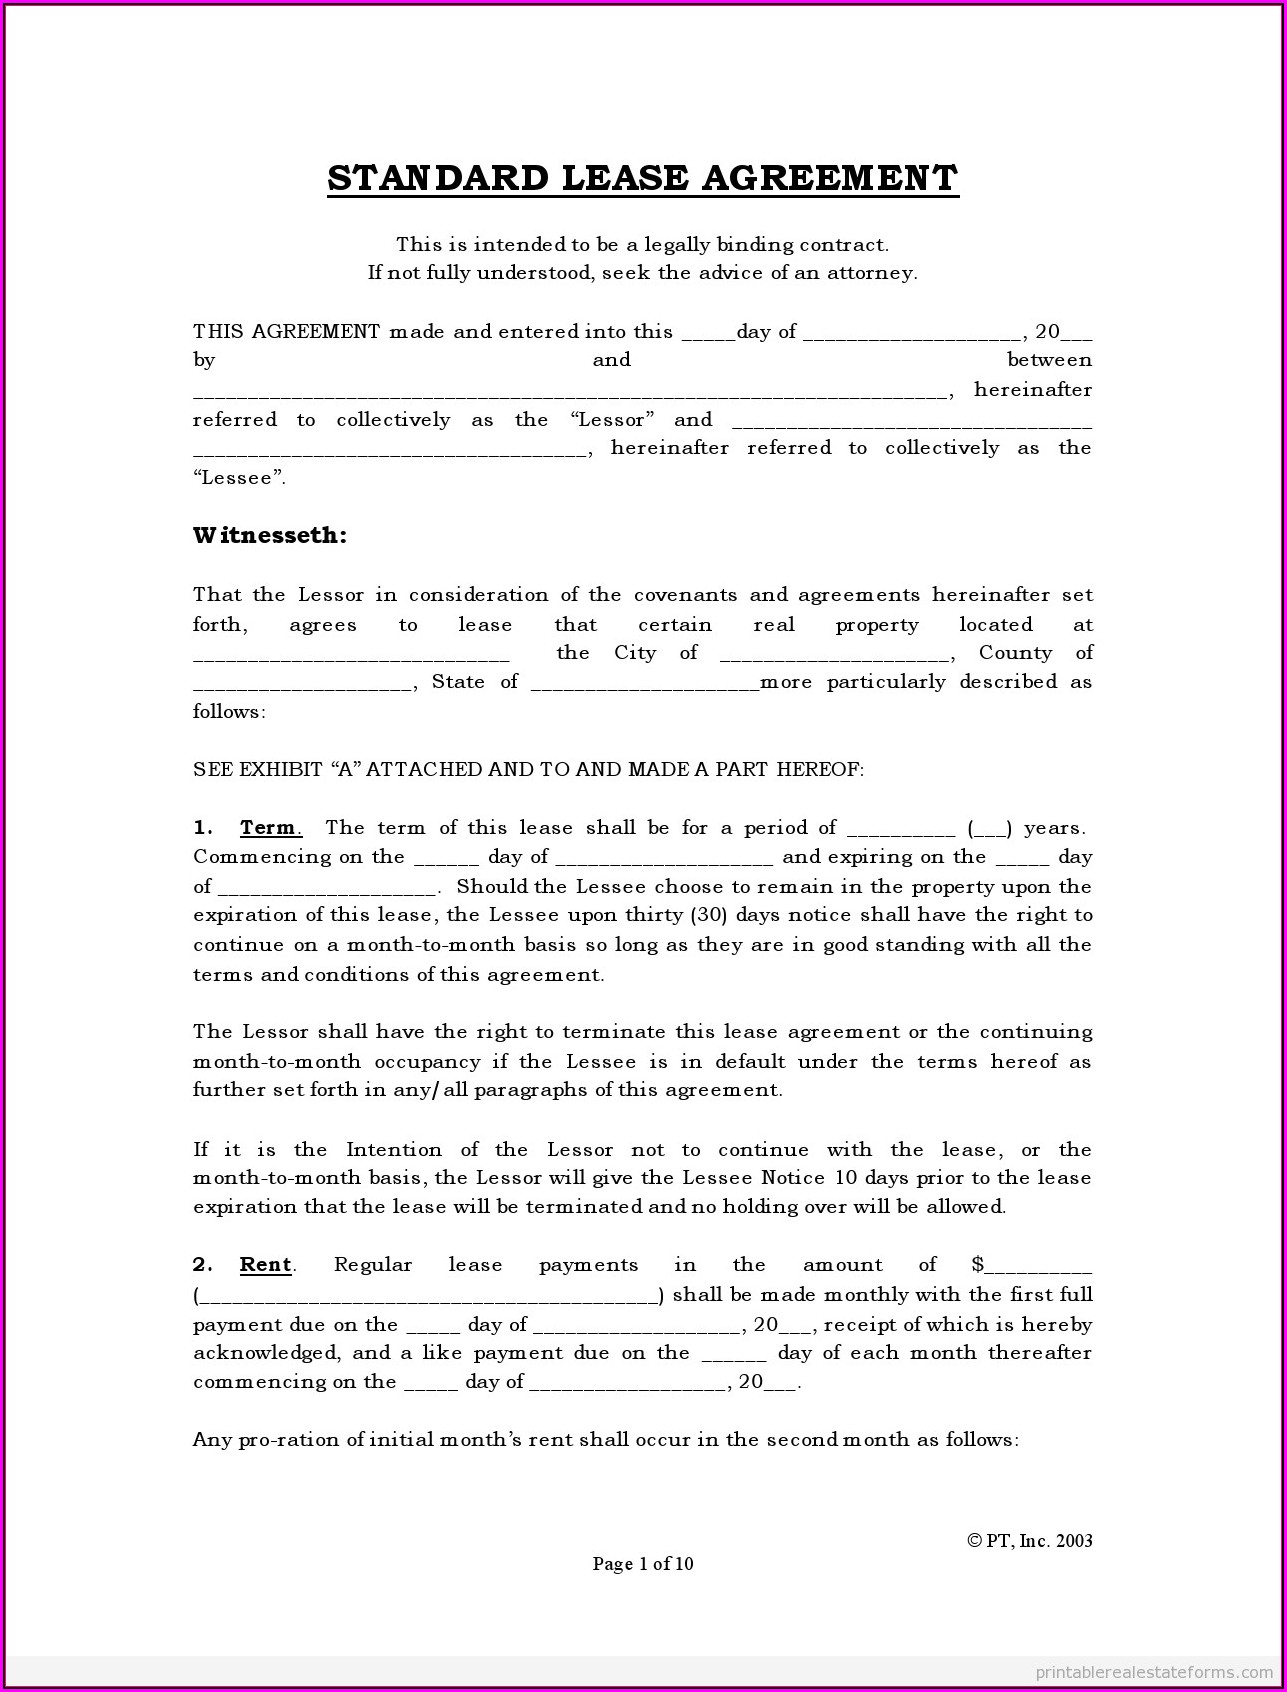 washington-state-residential-lease-agreement-create-download